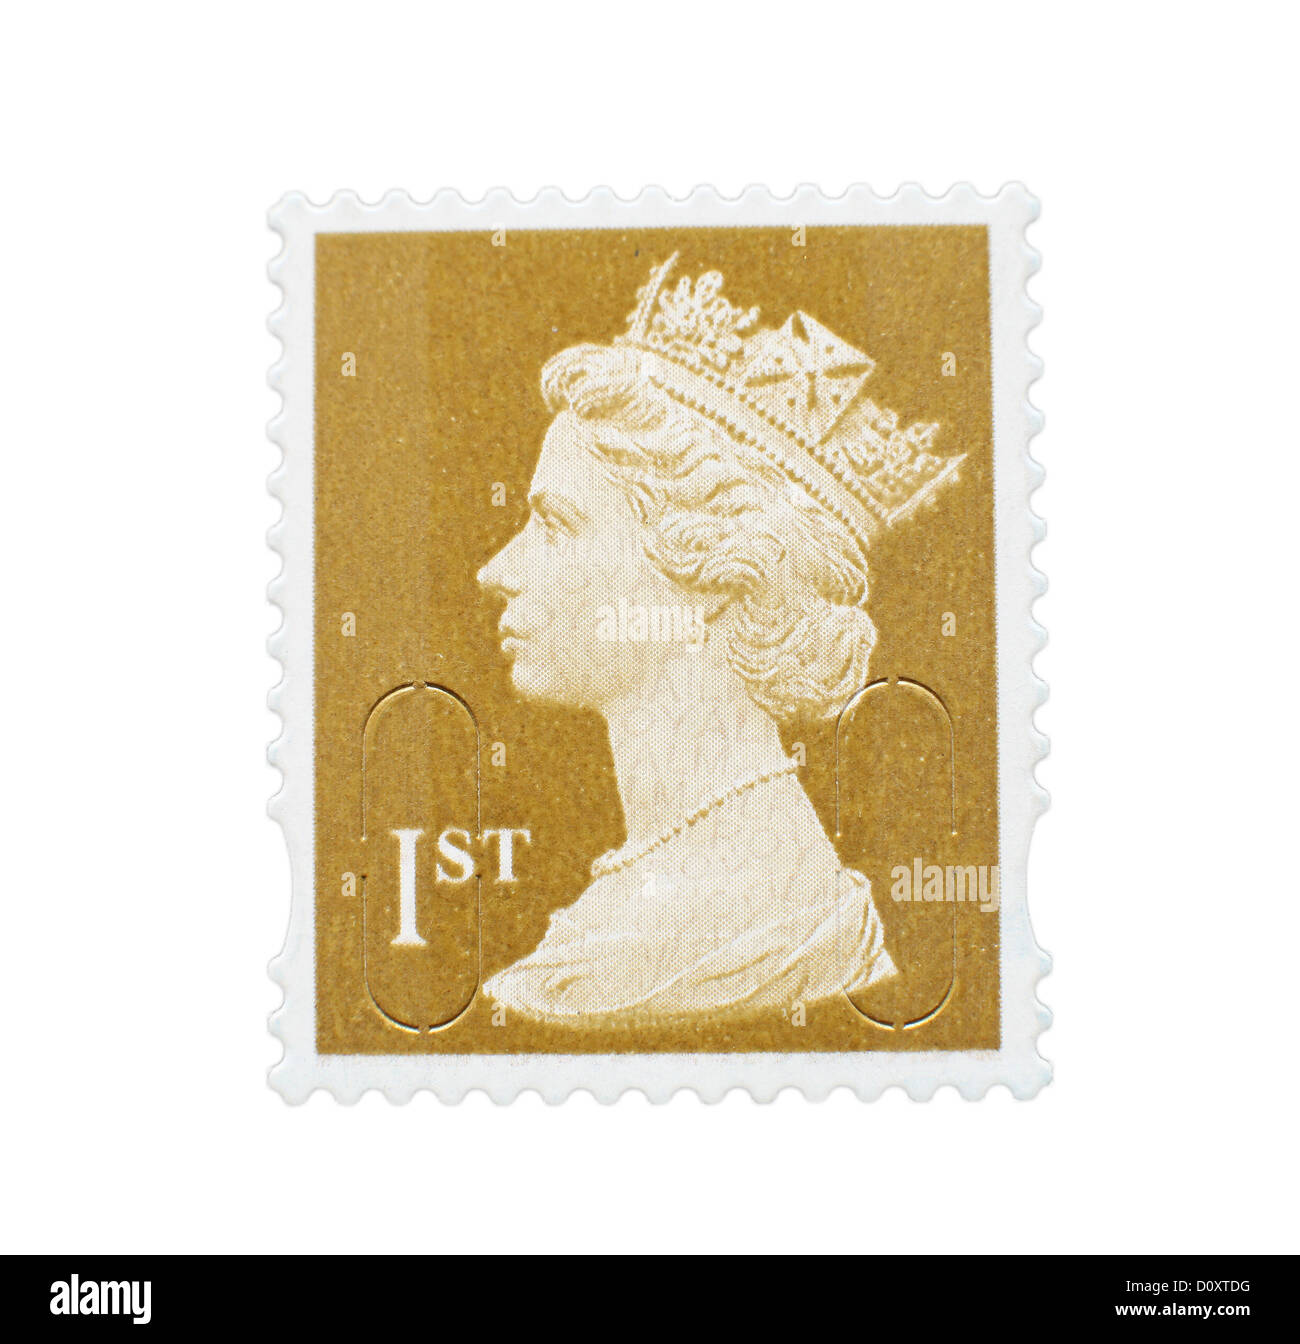 Royal Mail First Class Stamp. Picture by James Boardman. Stock Photo